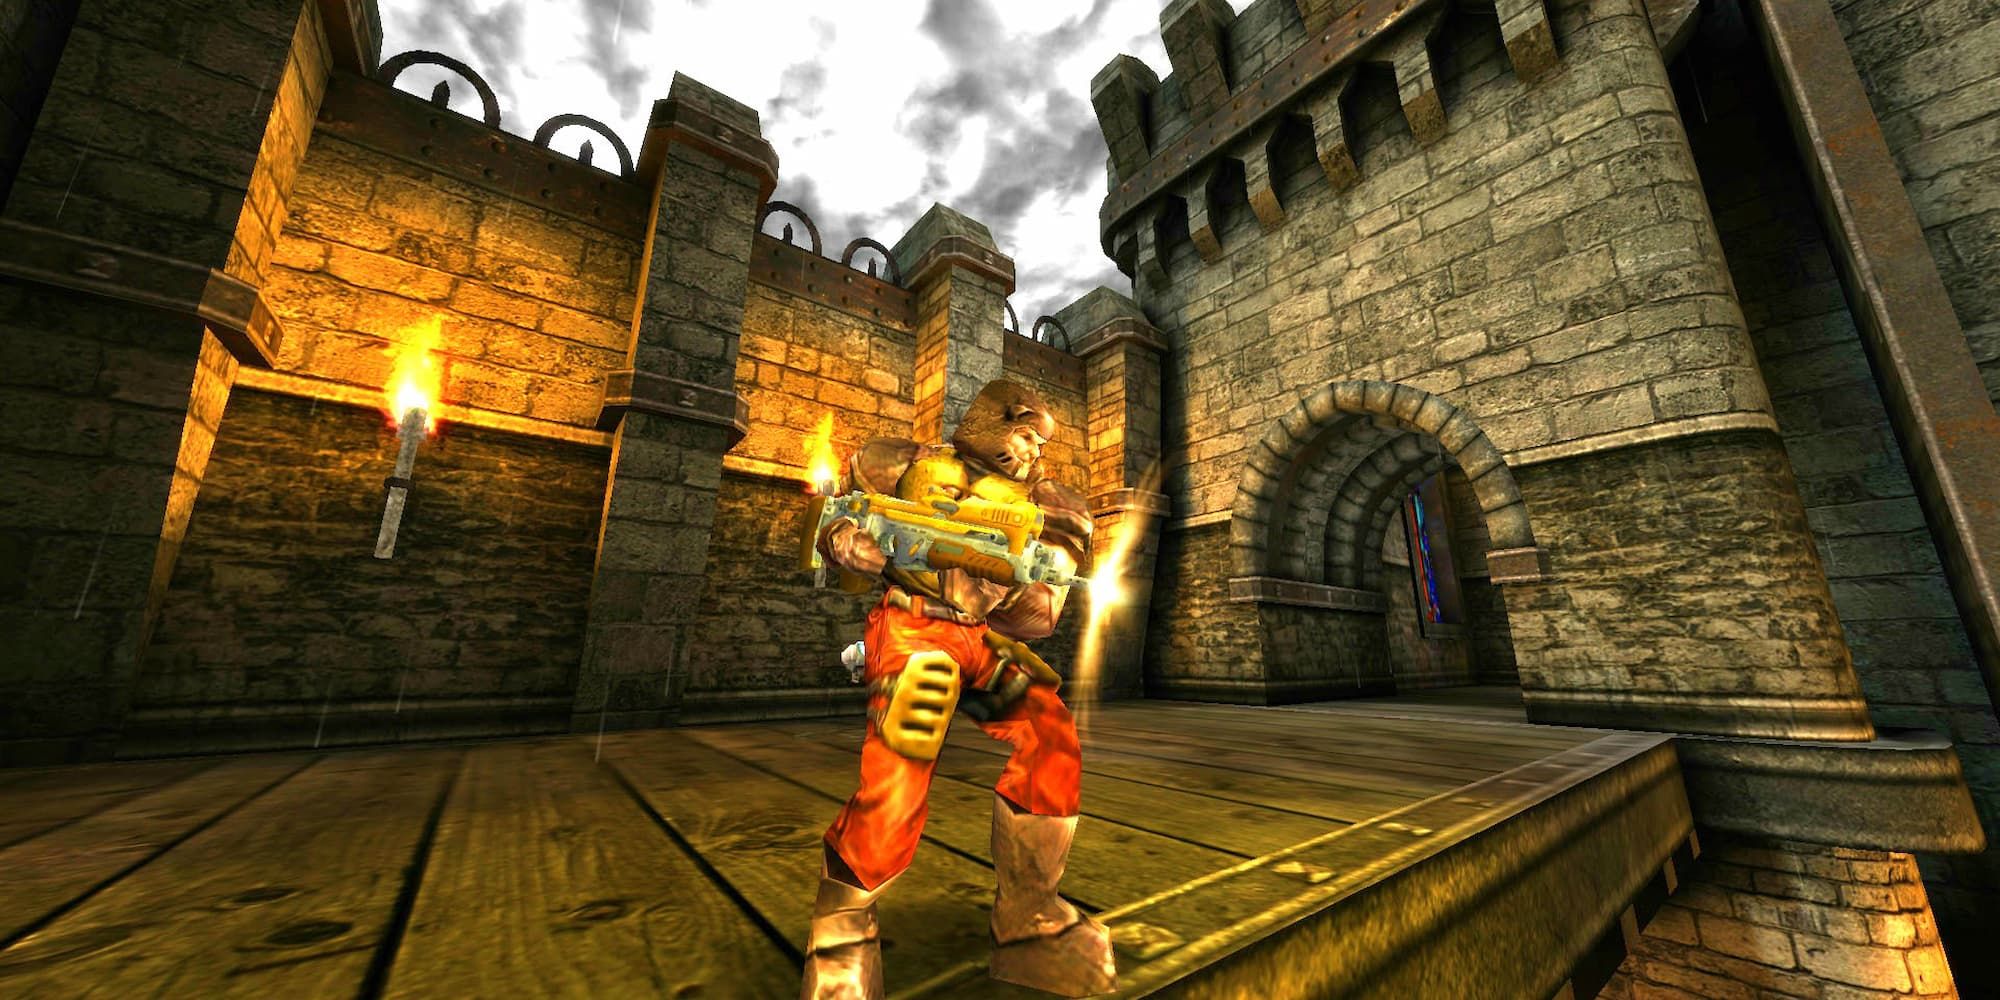 A player fires from the top walkway of a castle in Quake 3 Arena.